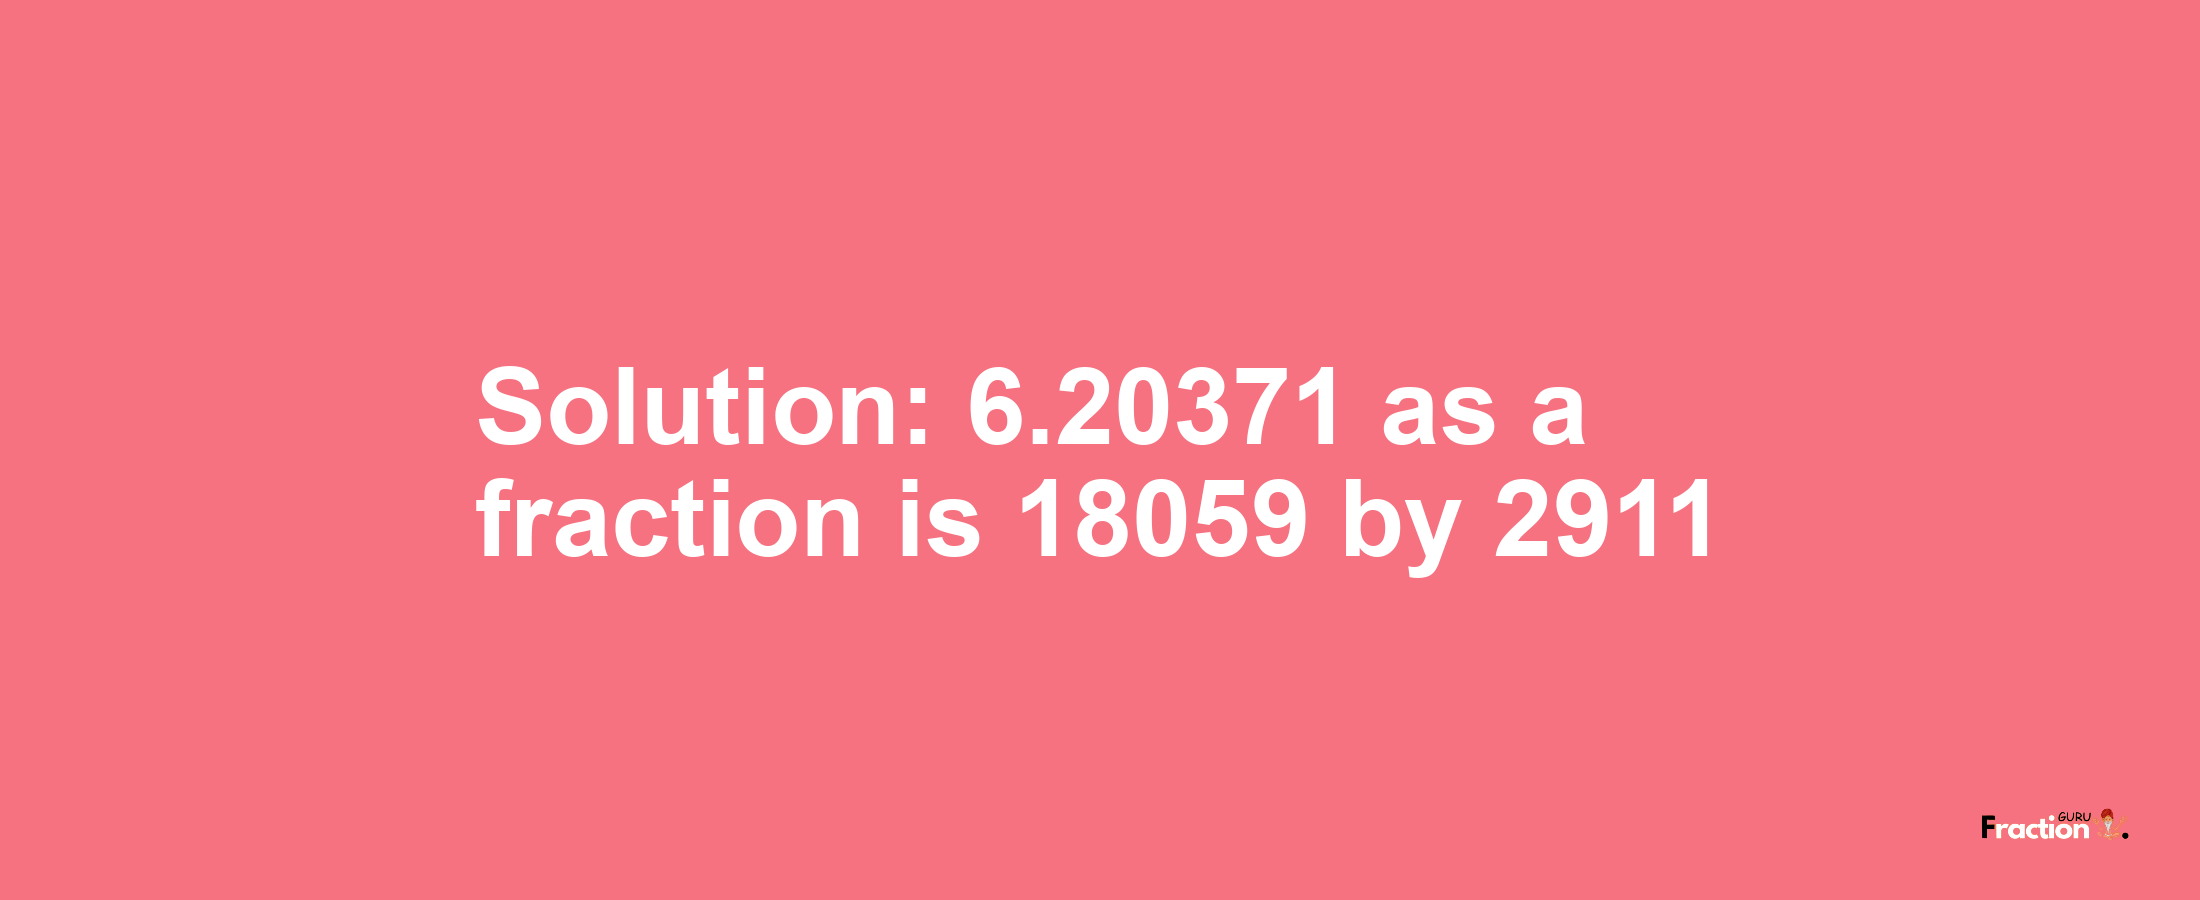 Solution:6.20371 as a fraction is 18059/2911